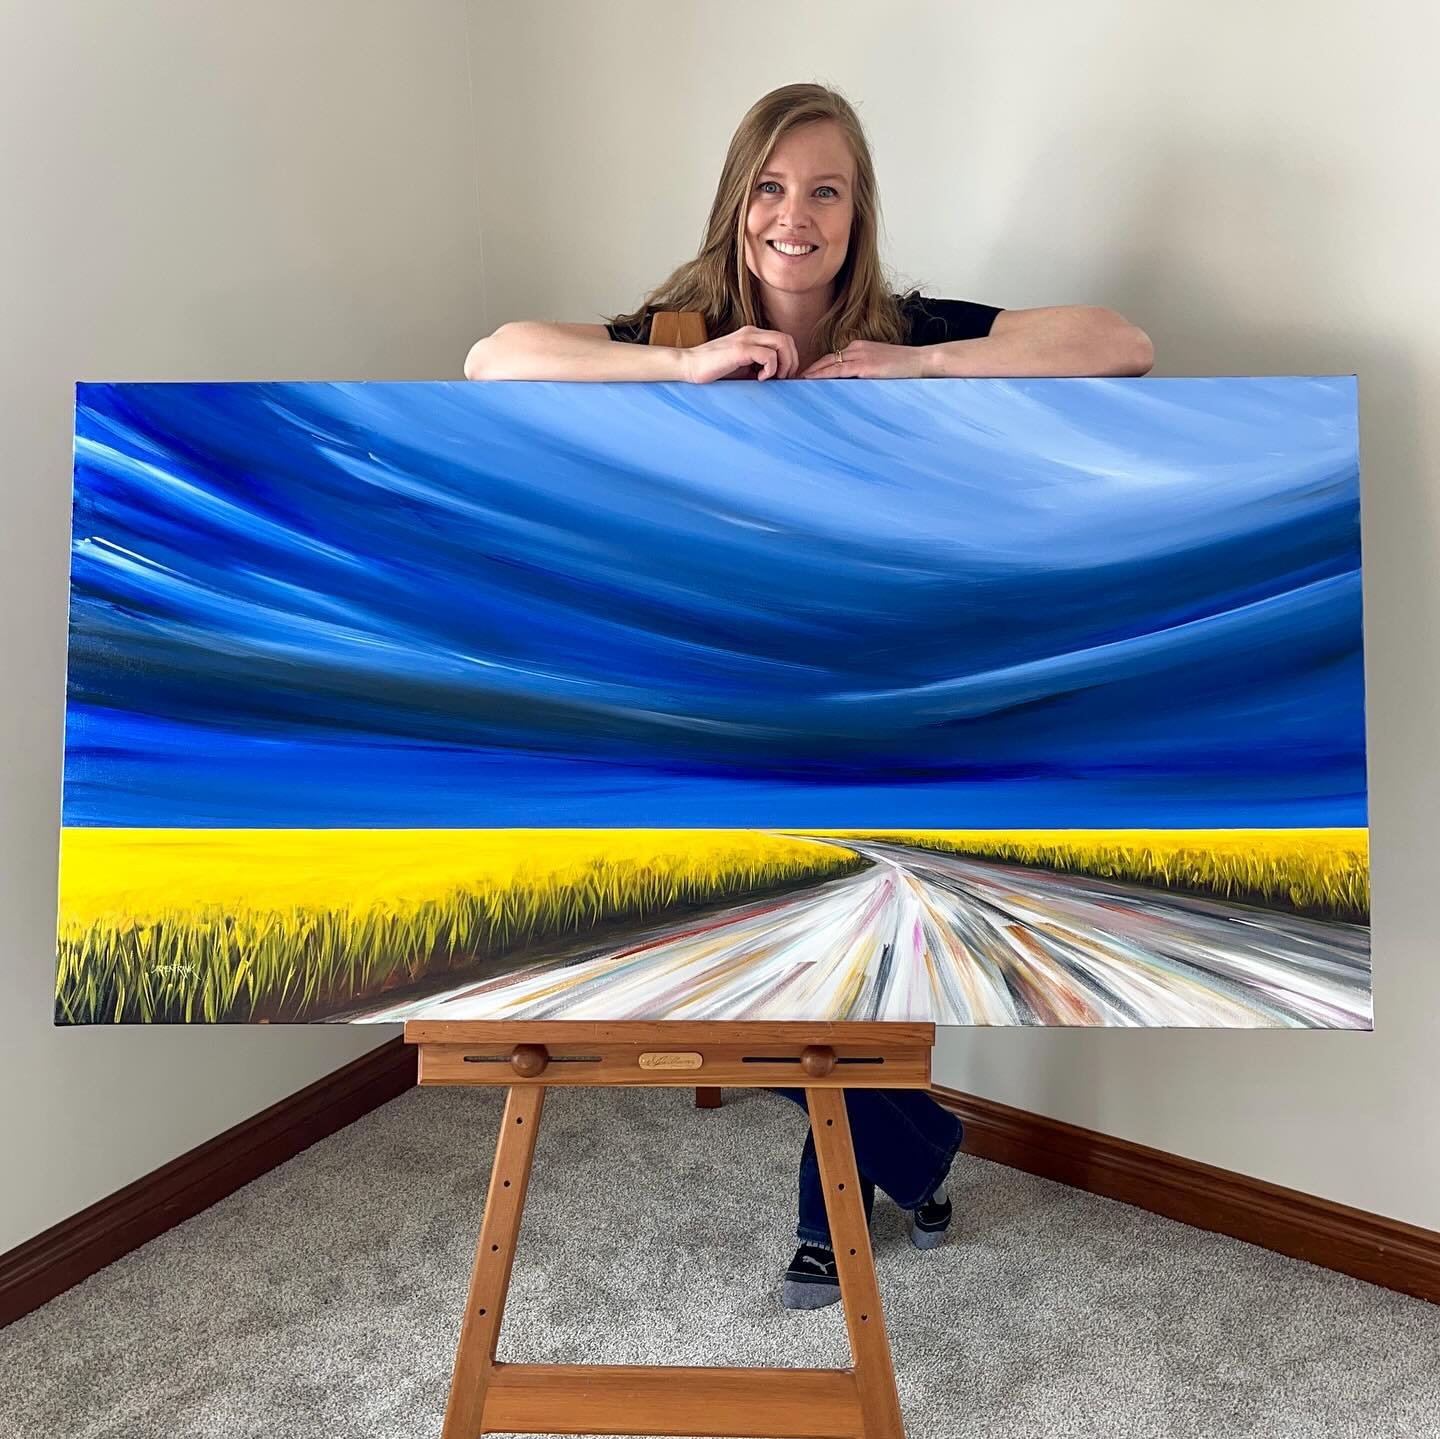 Take Me There. A peaceful drive down a gravel road. A beautiful prairie afternoon. 30x60 available at @avensgallery 

#countrydrive #countryroad #goldenafternoon #travelalberta #travelsaskatchewan